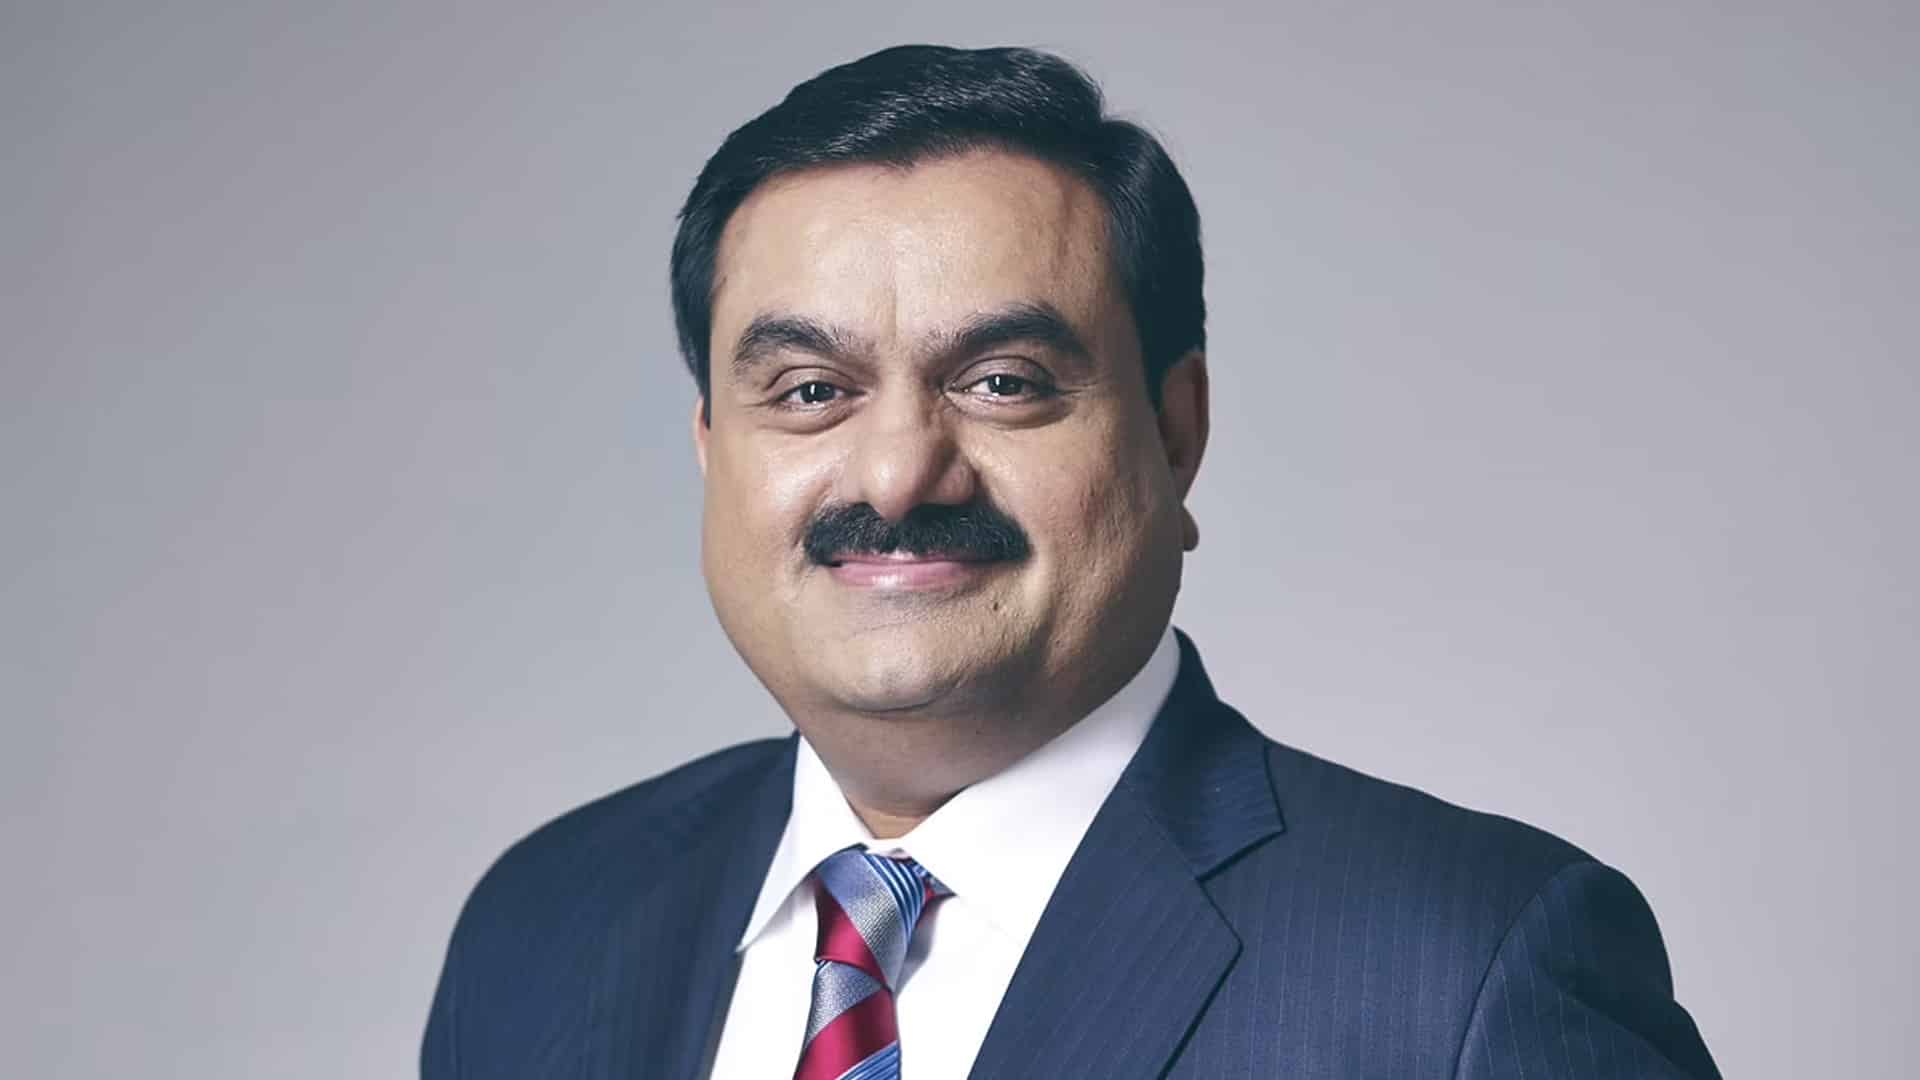 Adani Group fastest in valuation growth at 88 pc, Ambani-led RIL up 13.4 pc: Report